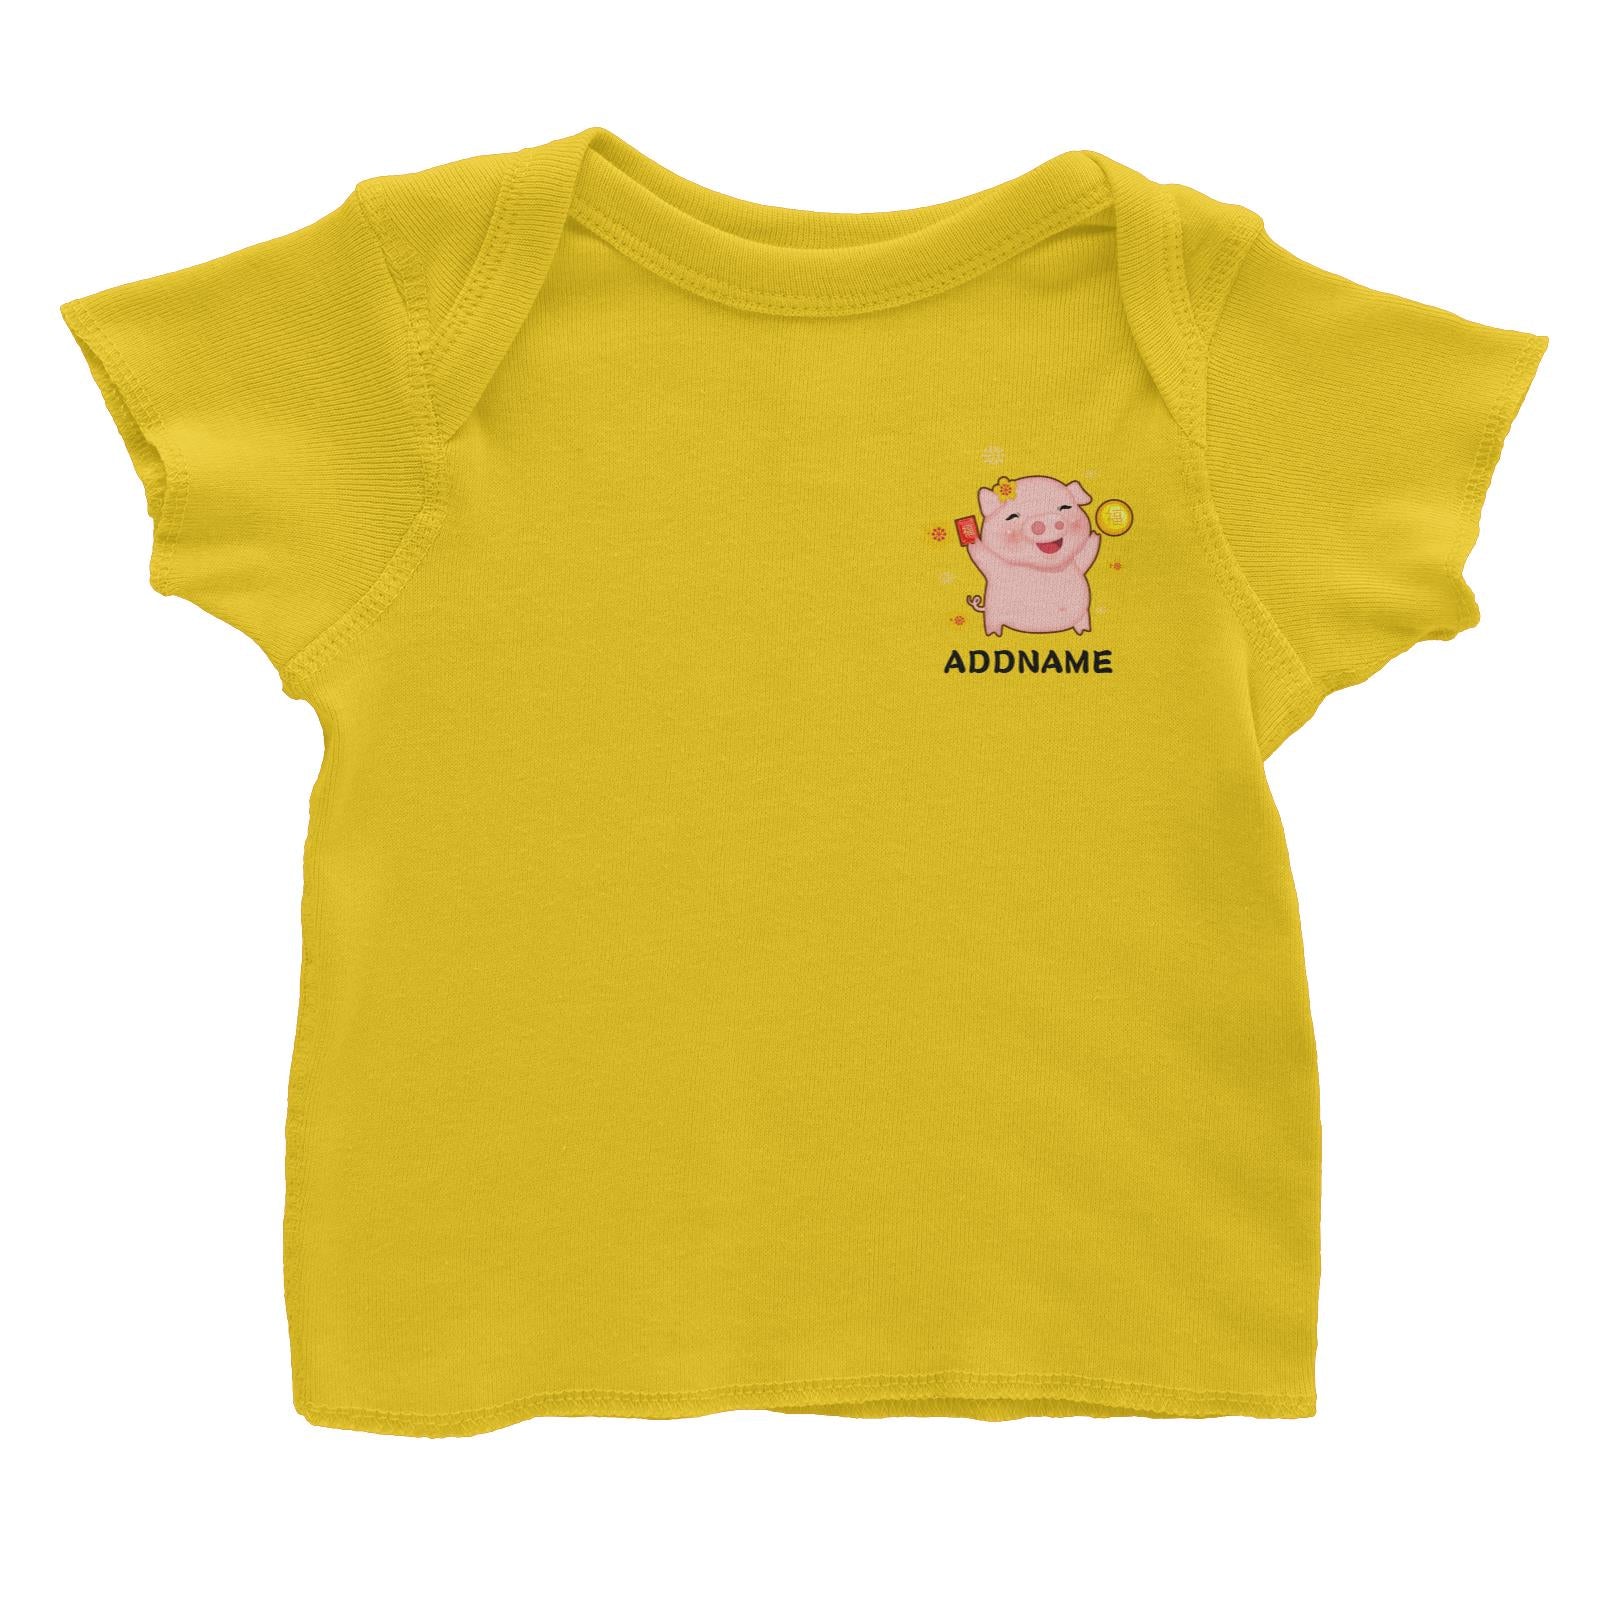 Cute Pig CNY Pig Girl with Red Packet and Happiness Symbol Pocket Design Baby T-Shirt